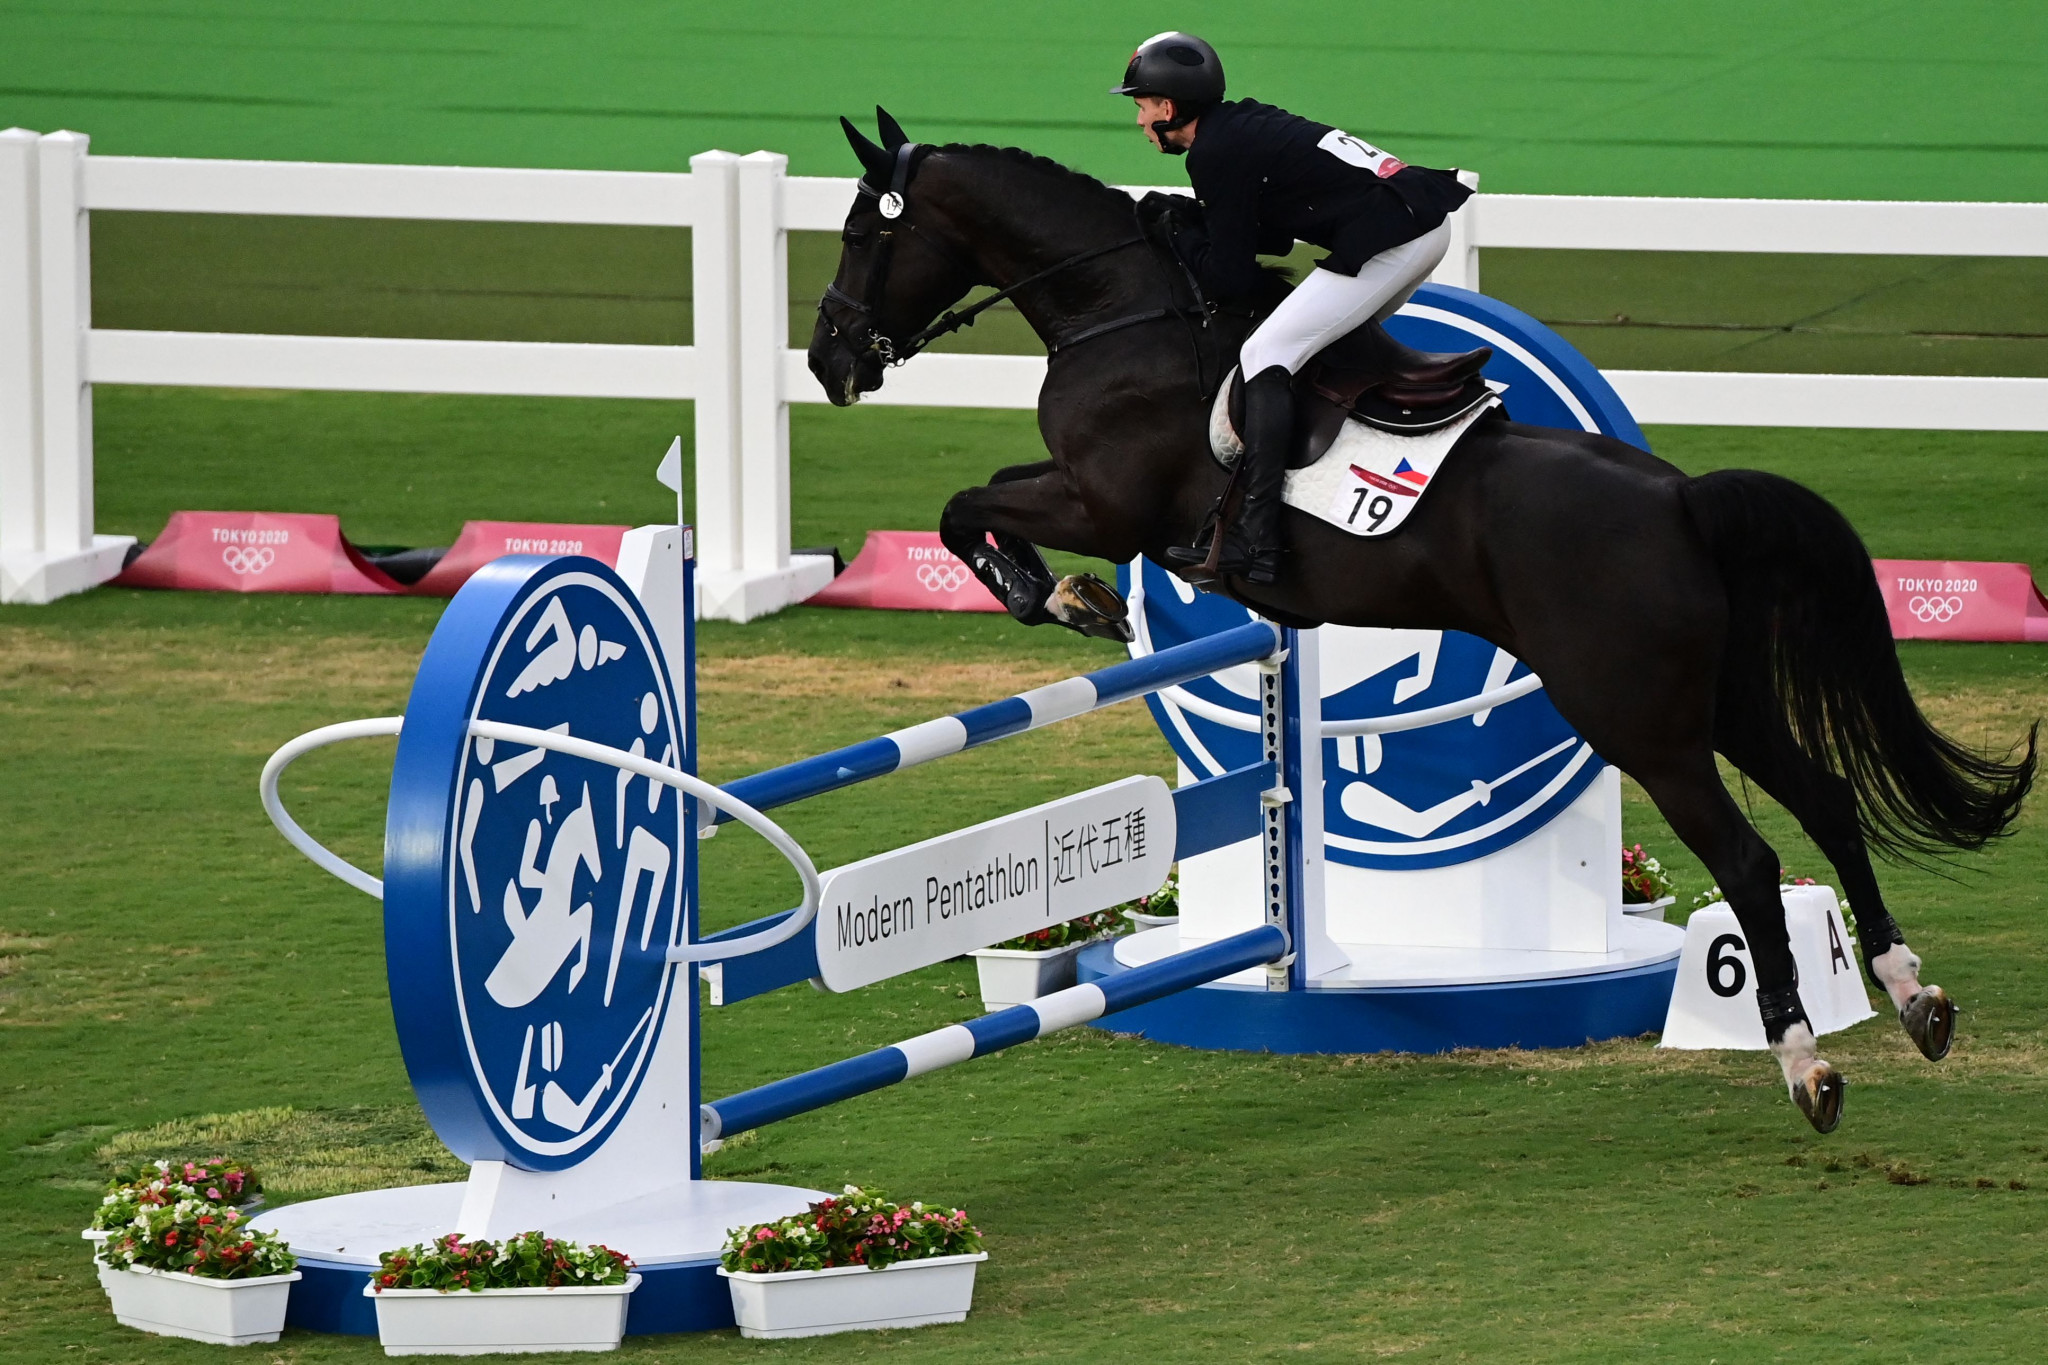 The process to find a horse riding replacement in the modern pentathlon in time for Los Angeles 2028 has begun ©Getty Images